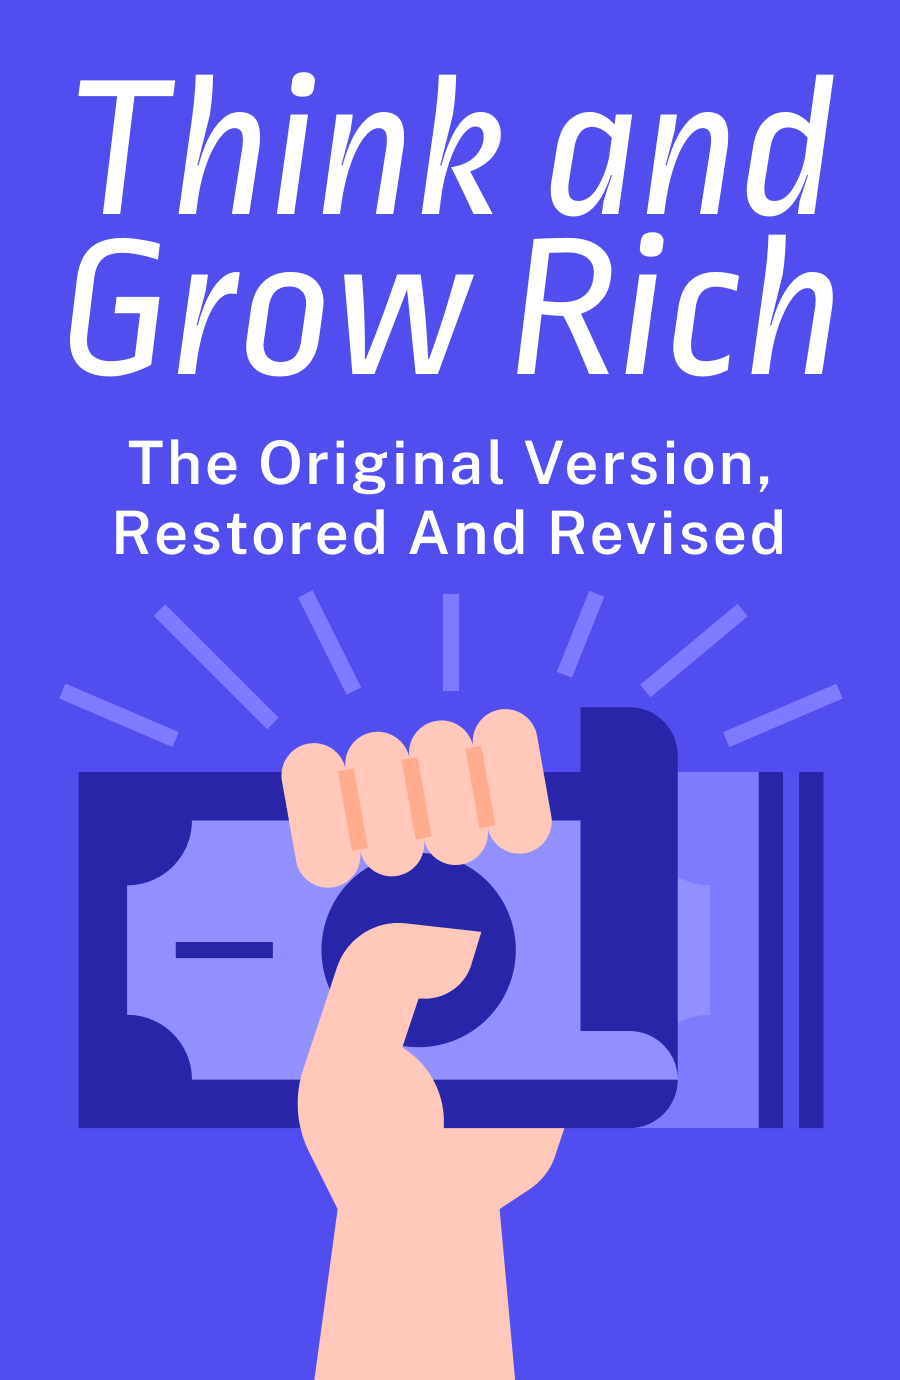 Think and Grow Rich Book Cover